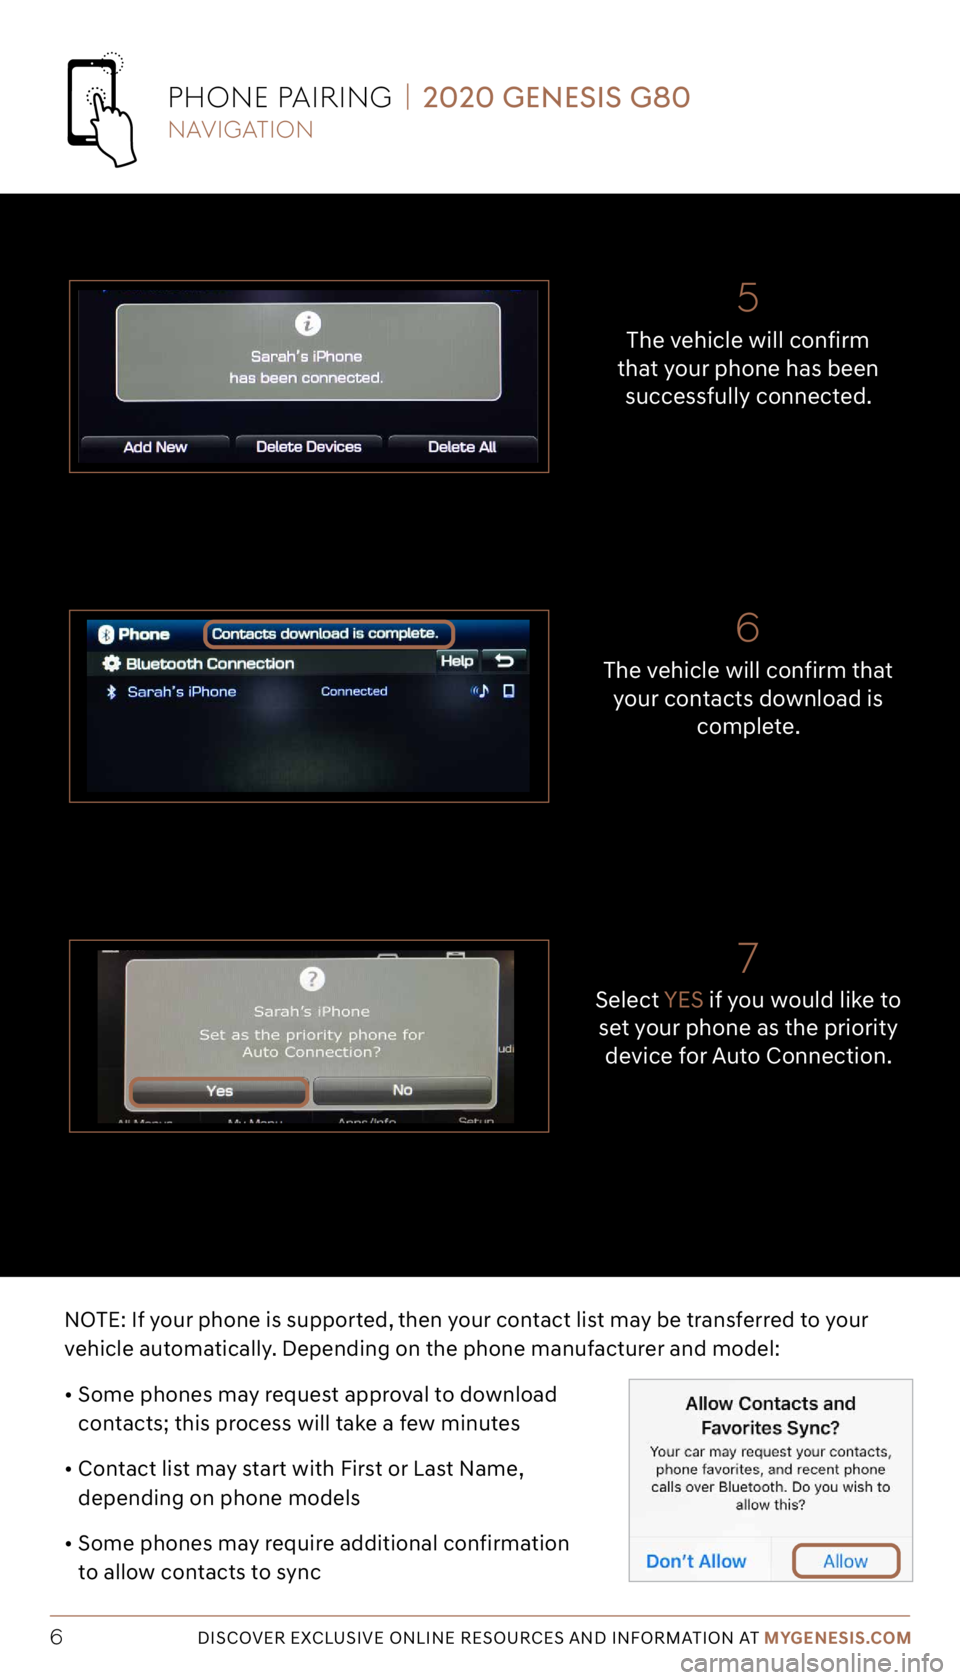 GENESIS G80 2020  Getting Started Guide DISCOVER EXCLUSIVE ONLINE RESOURCES AND INFORMATION AT MYGENESIS.COM6
Select YES if you would like to 
set your phone as the priority  device for Auto Connection.
7
The vehicle will confirm that  your